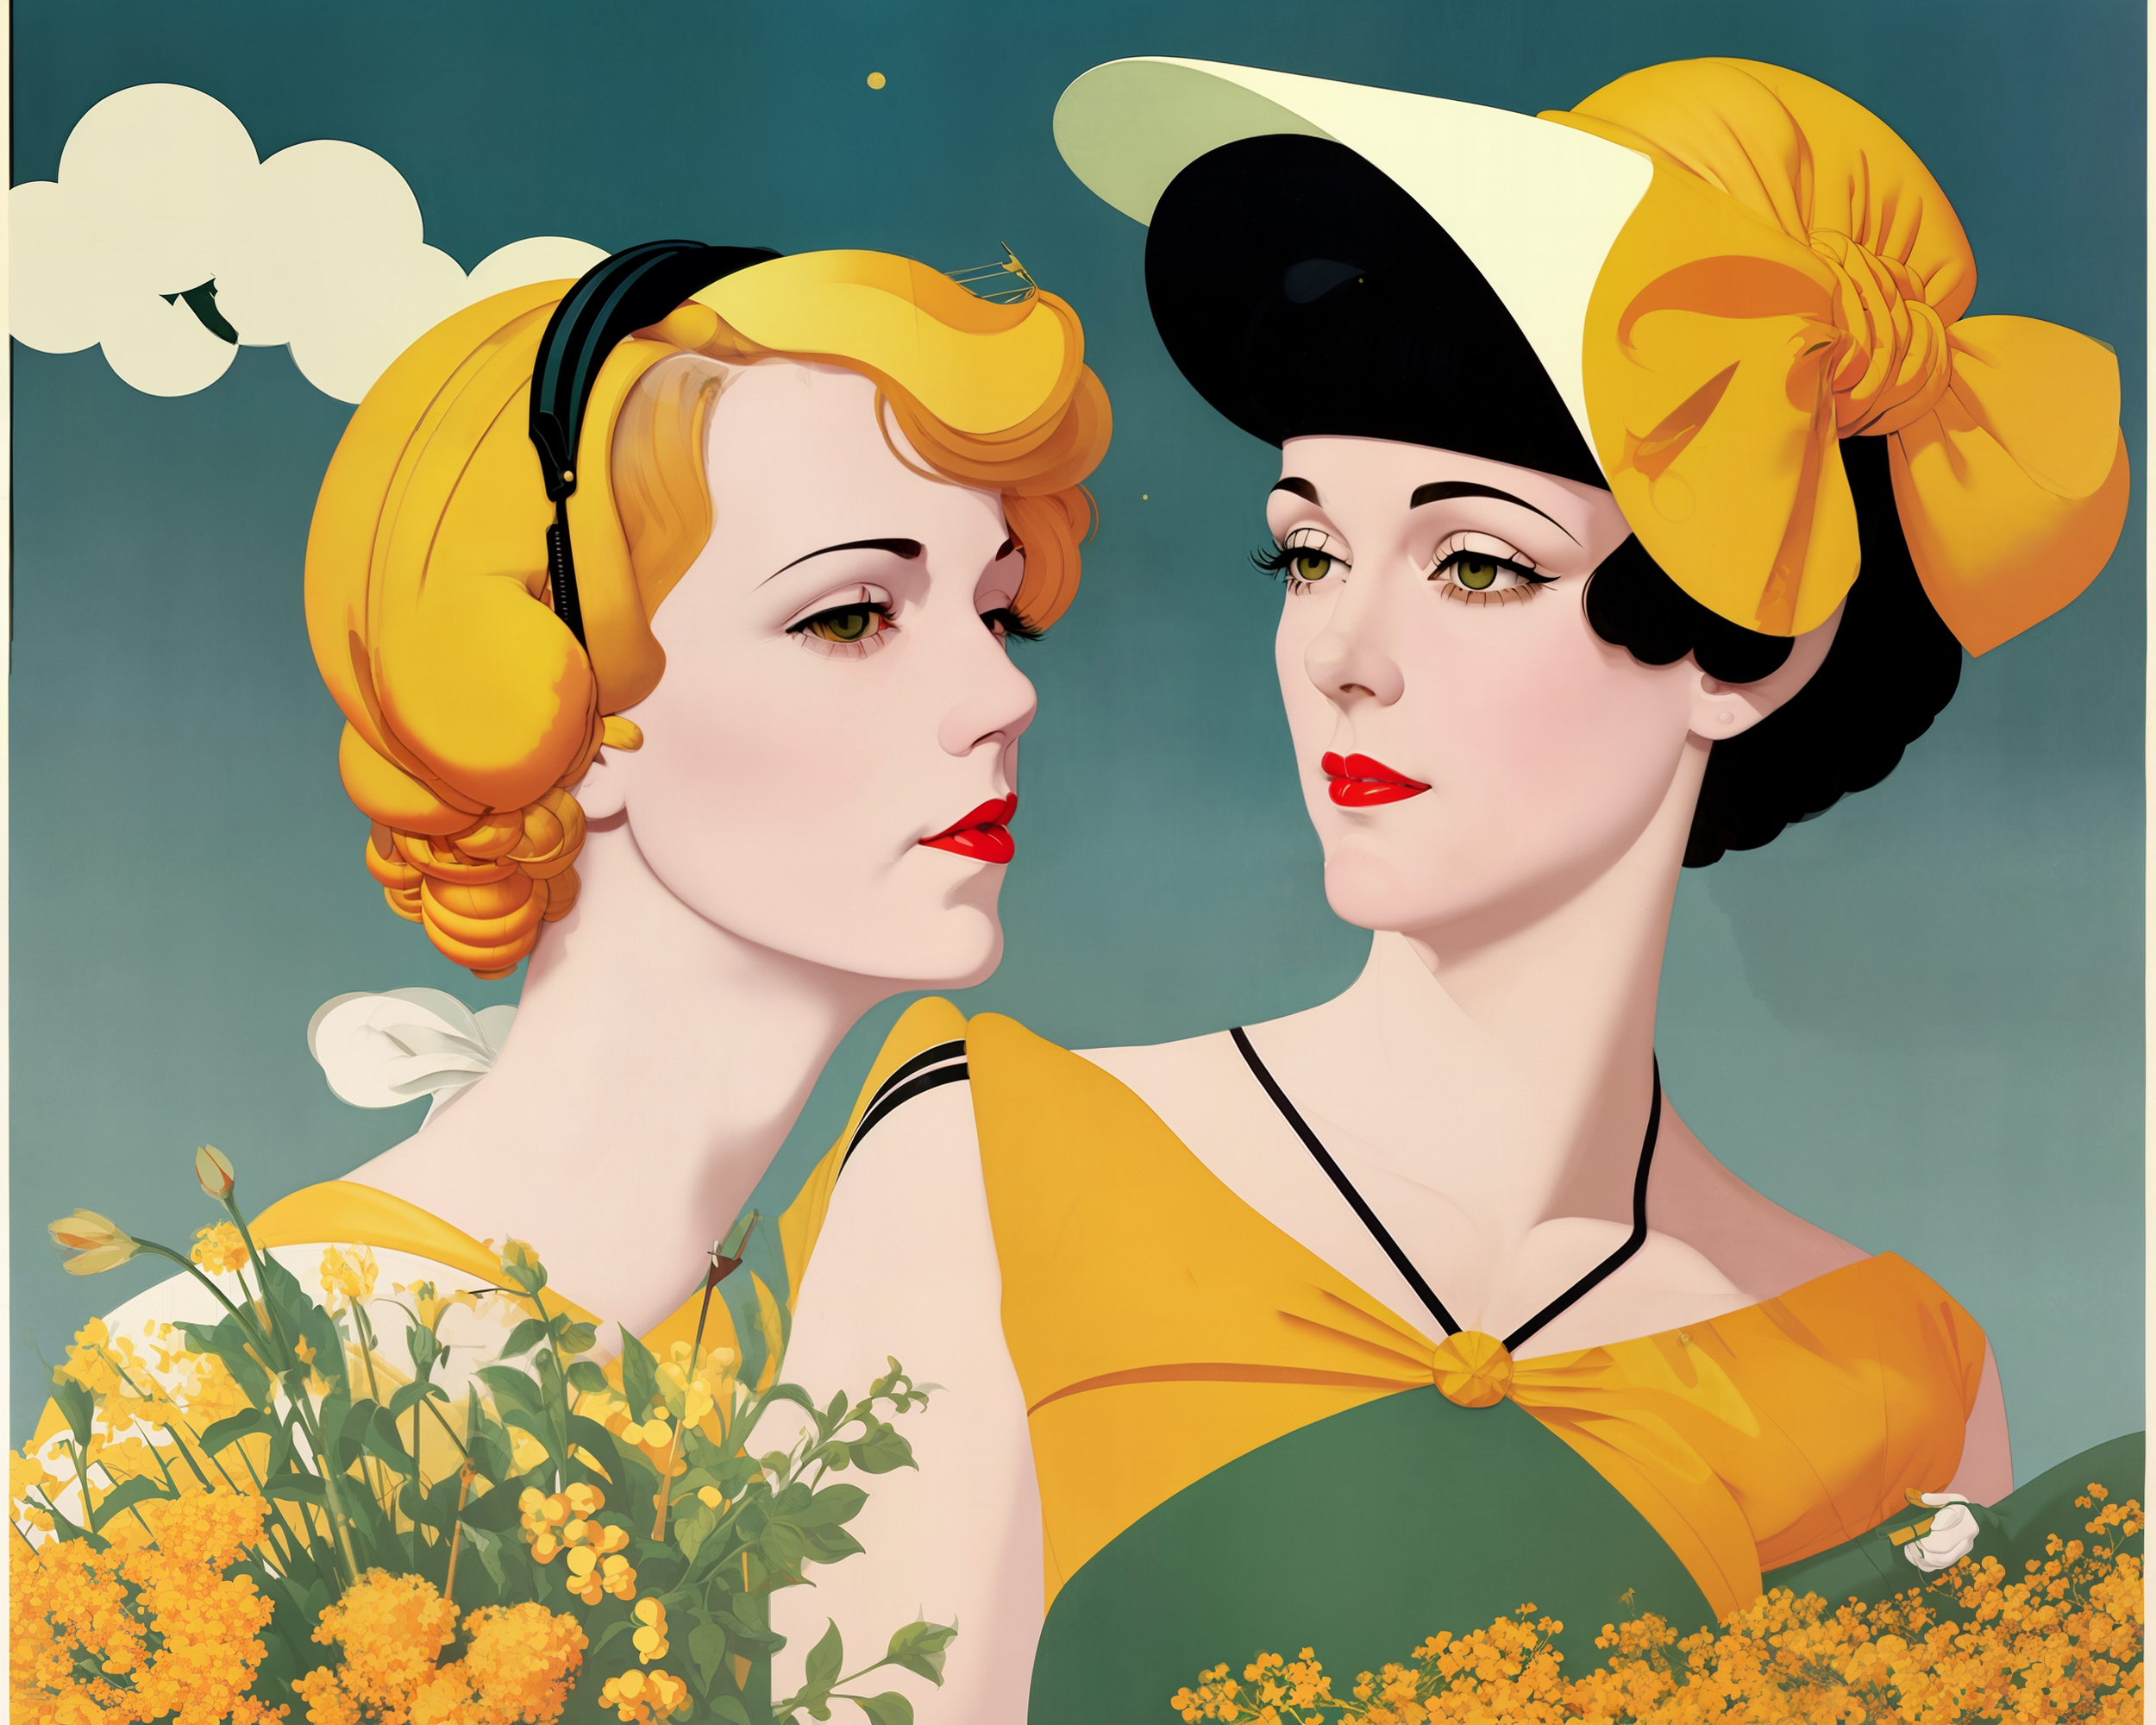 02079-1233223426-masterwork painting, detailed painterly art style by Coles Phillips, retro vibe, extremely hyperdetailed.png